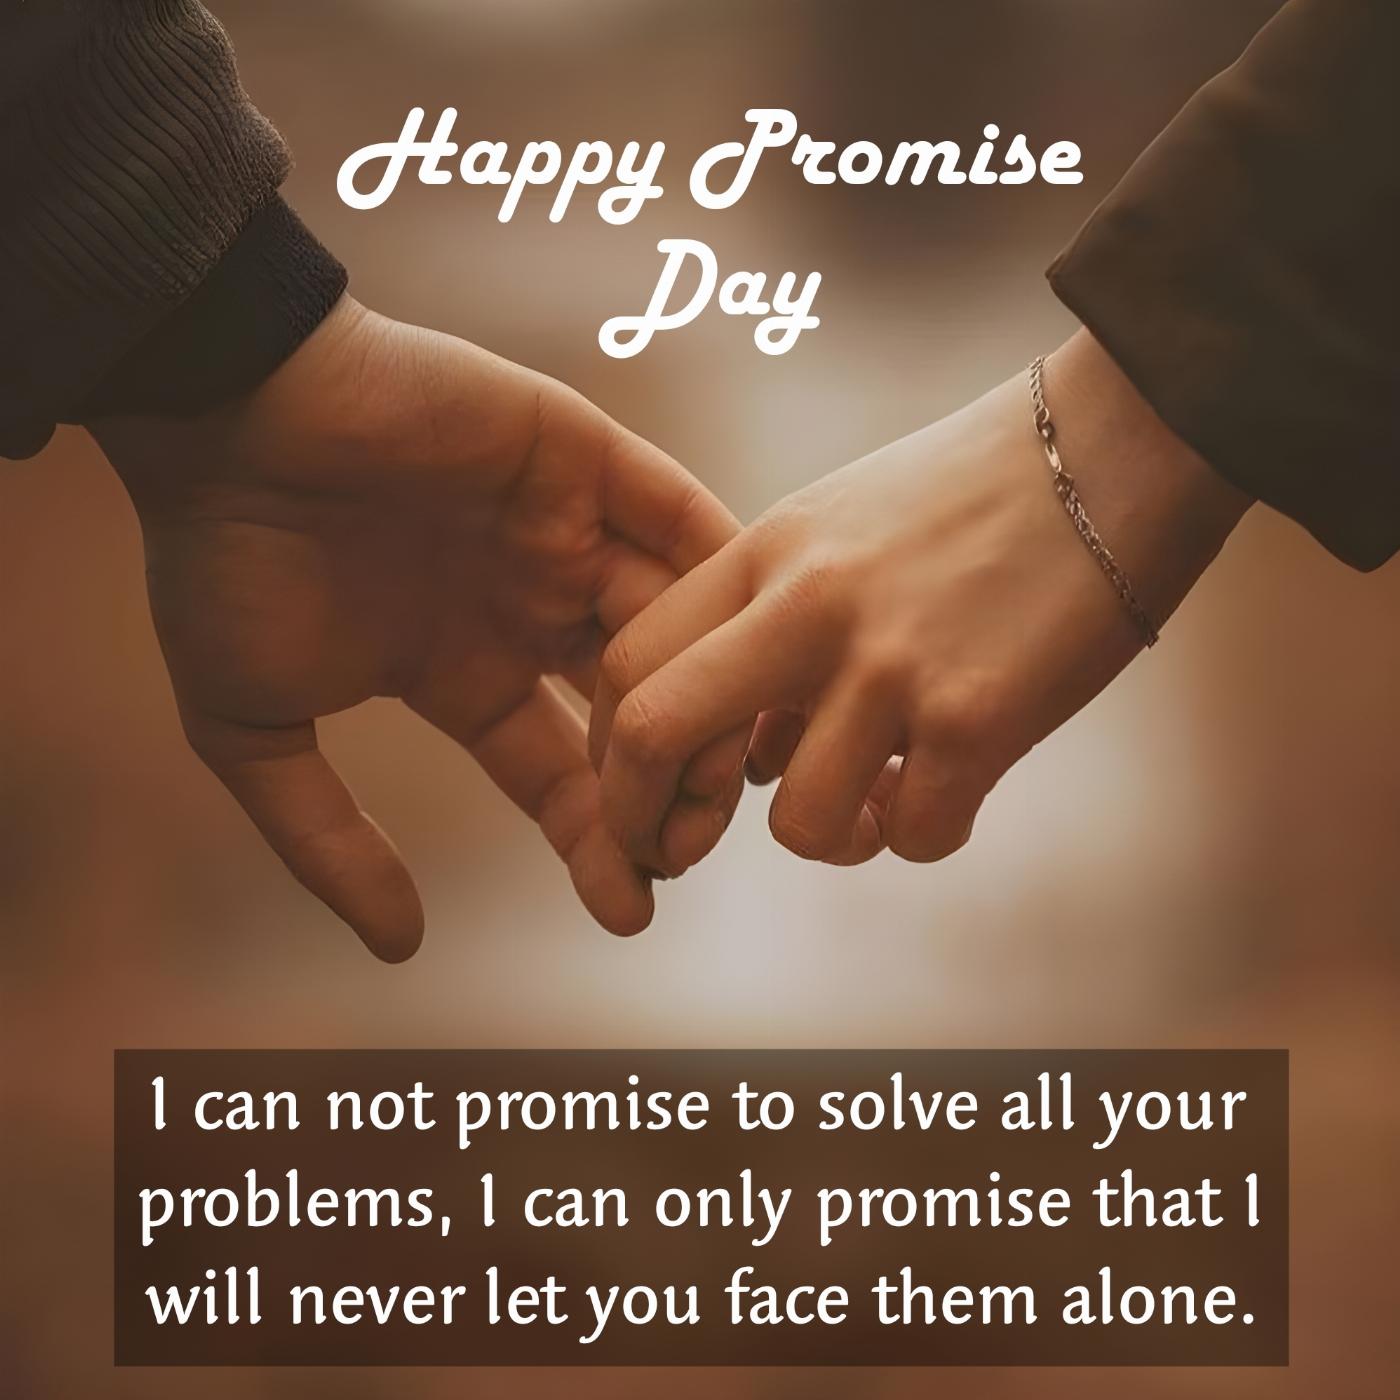 I can not promise to solve all your problems